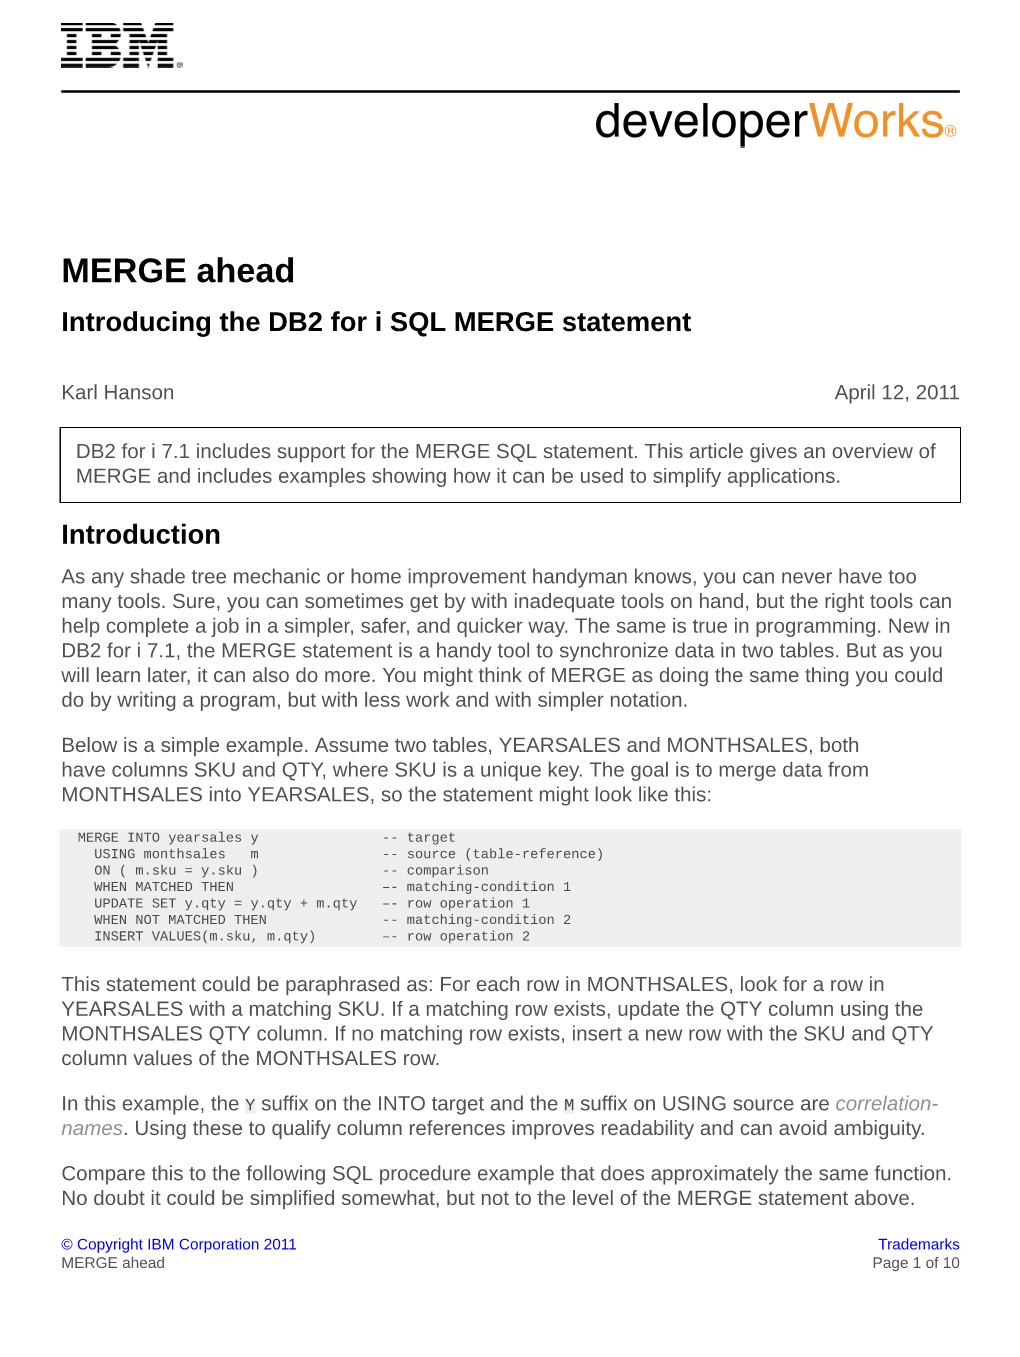 MERGE Ahead Introducing the DB2 for I SQL MERGE Statement